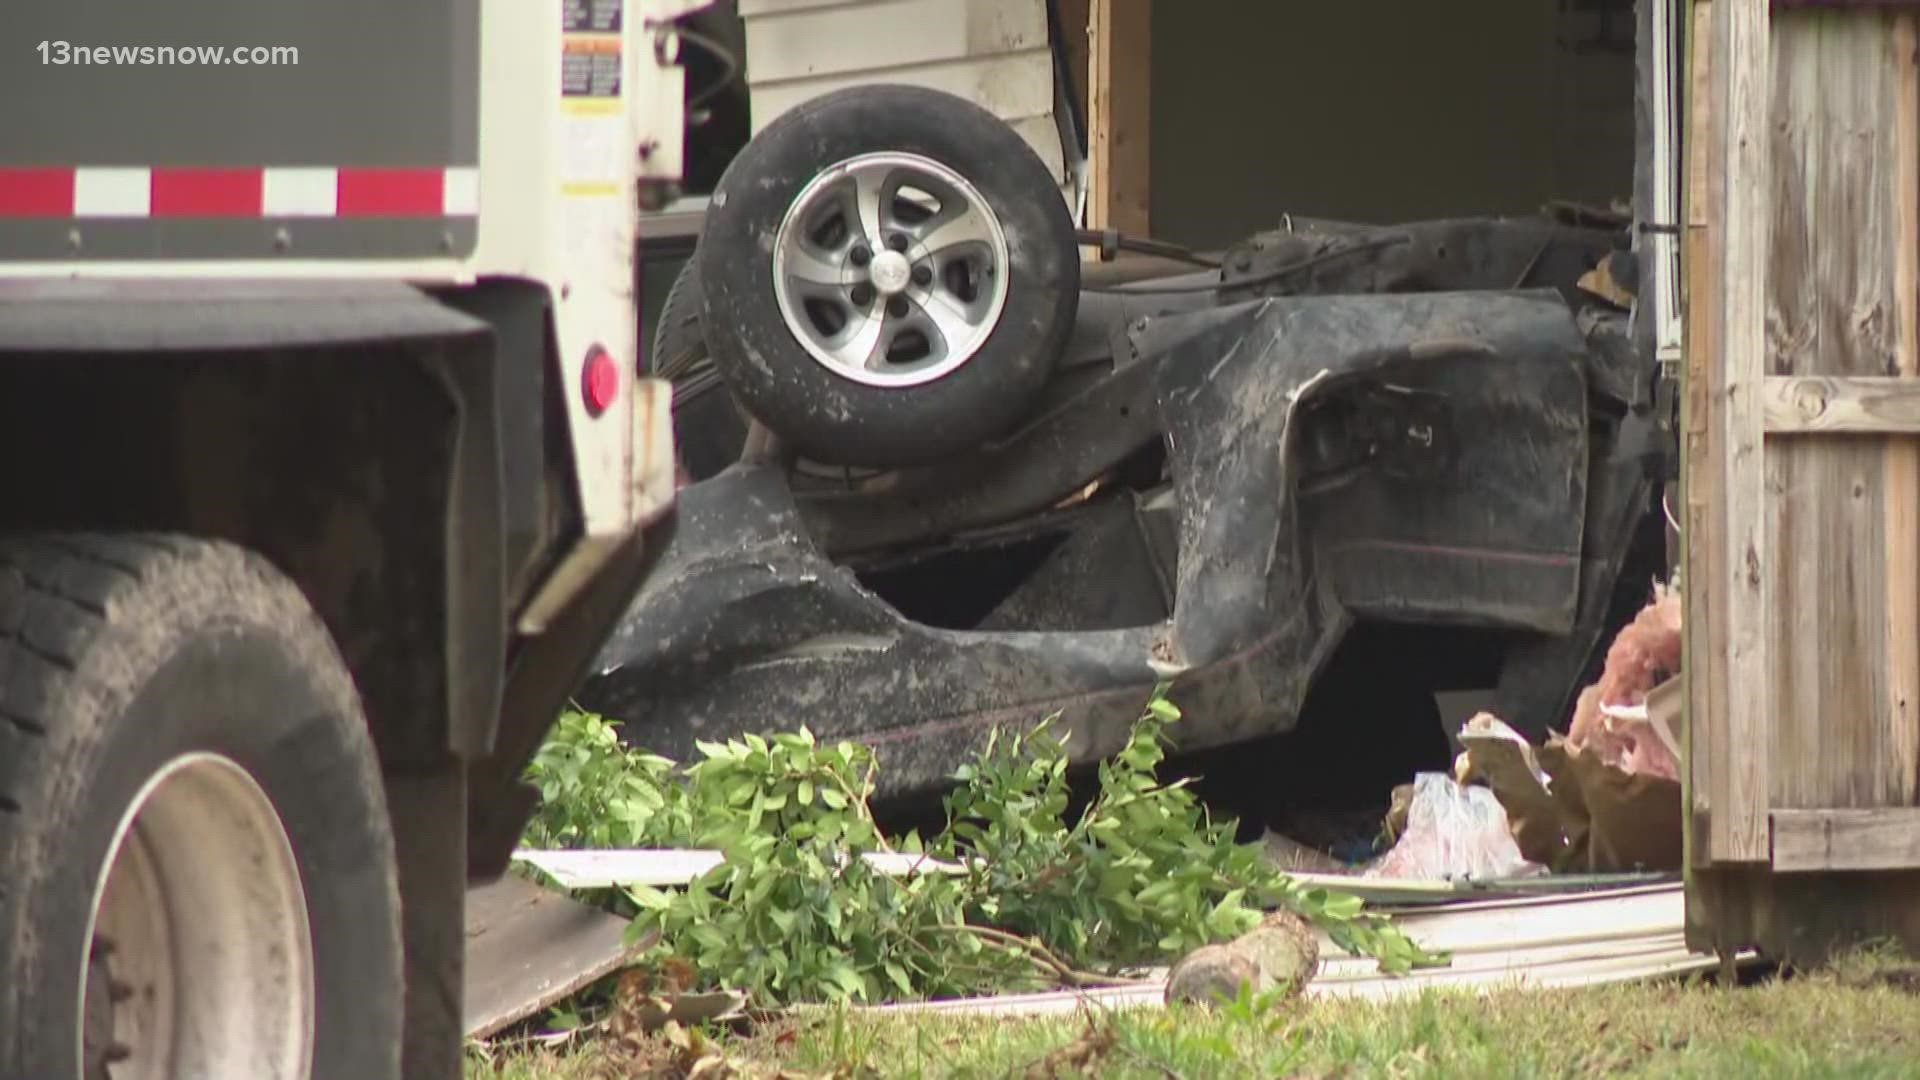 Police in Virginia Beach say they are investigating a crash involving multiple cars and a garbage truck.